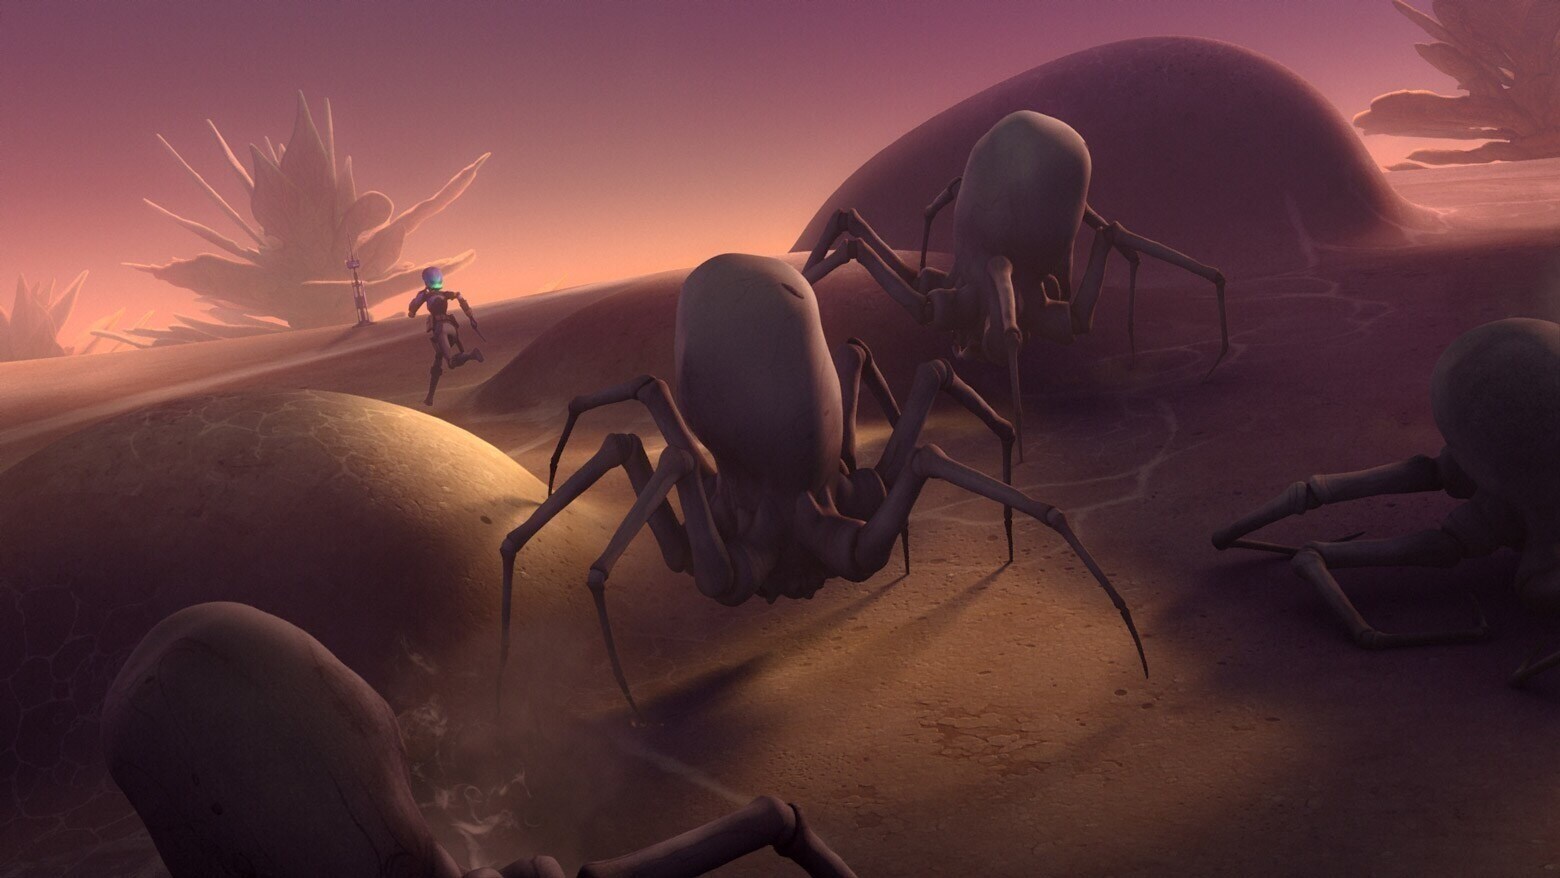 Krykna Spiders, also known as crawlers, chasing the rebels on Atollon